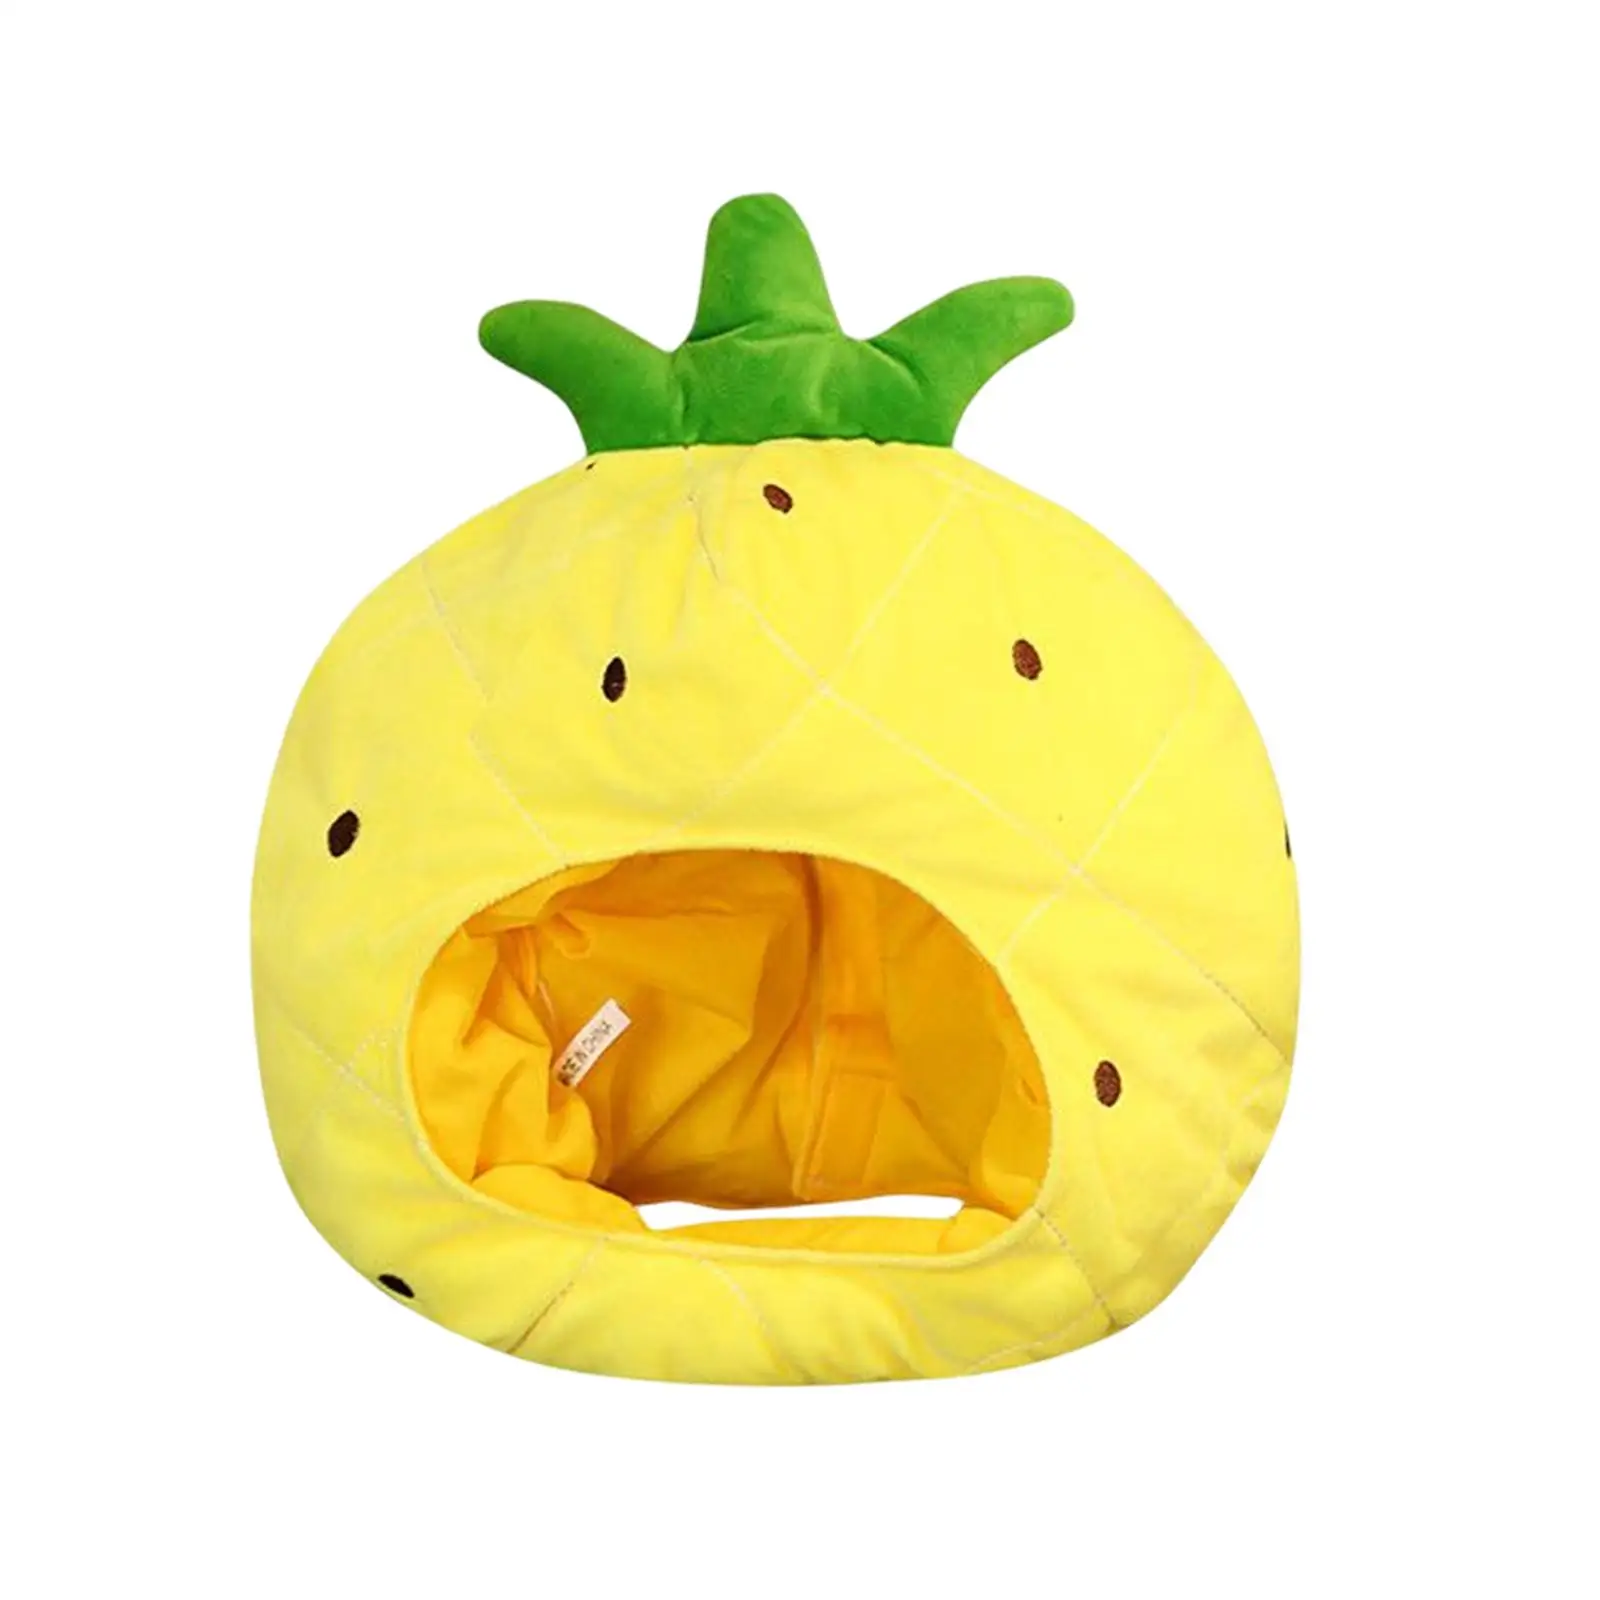 Costume Hat Plush Accessory Soft Decorations Novelty Fruits Hat for Party Birthday